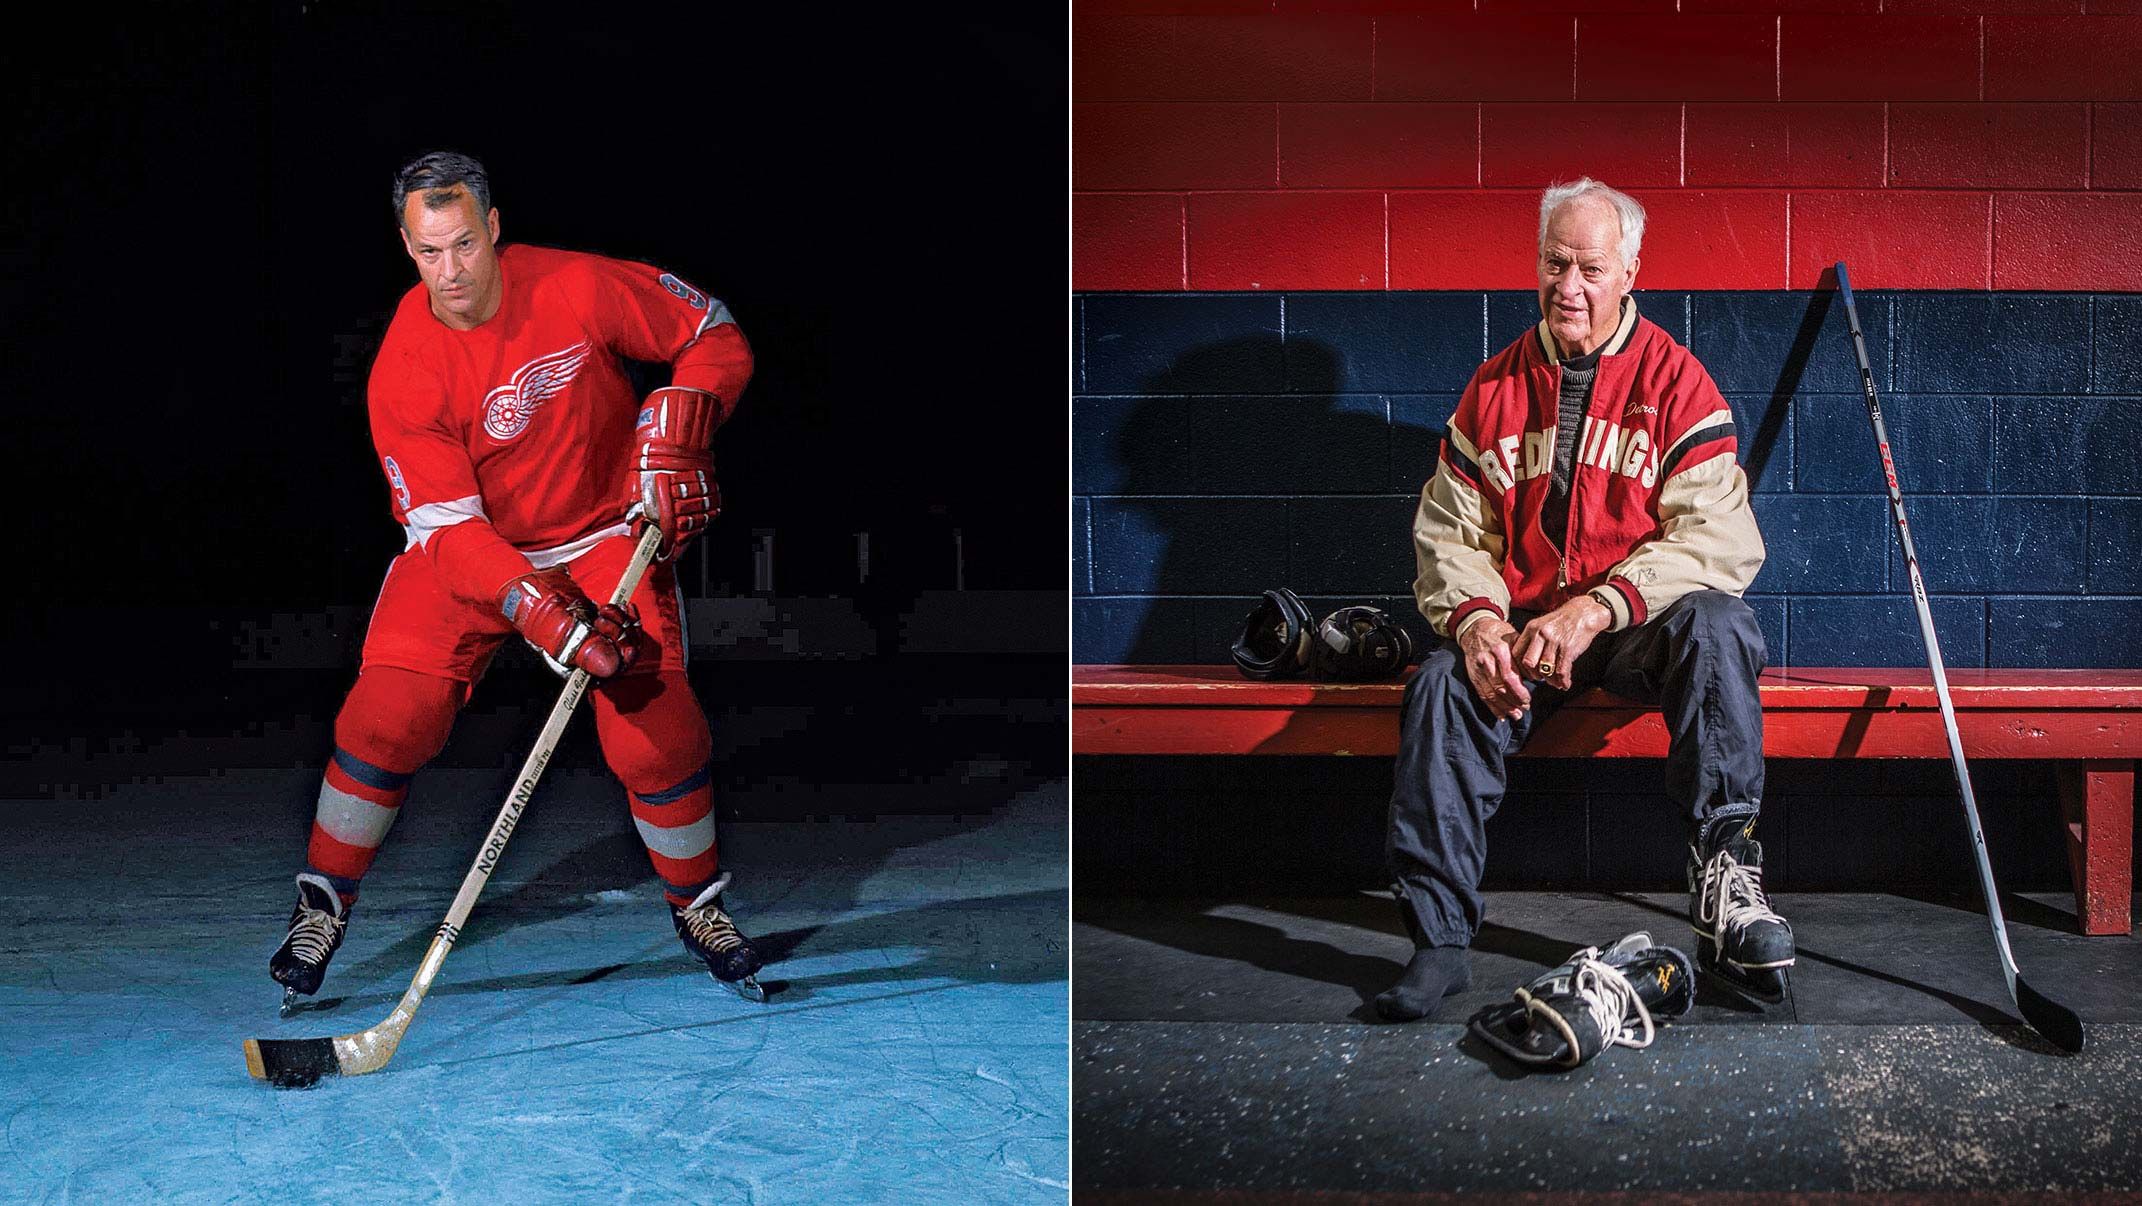 Mark Howe, left to right, Marty Howe, and Hockey Hall of Fame